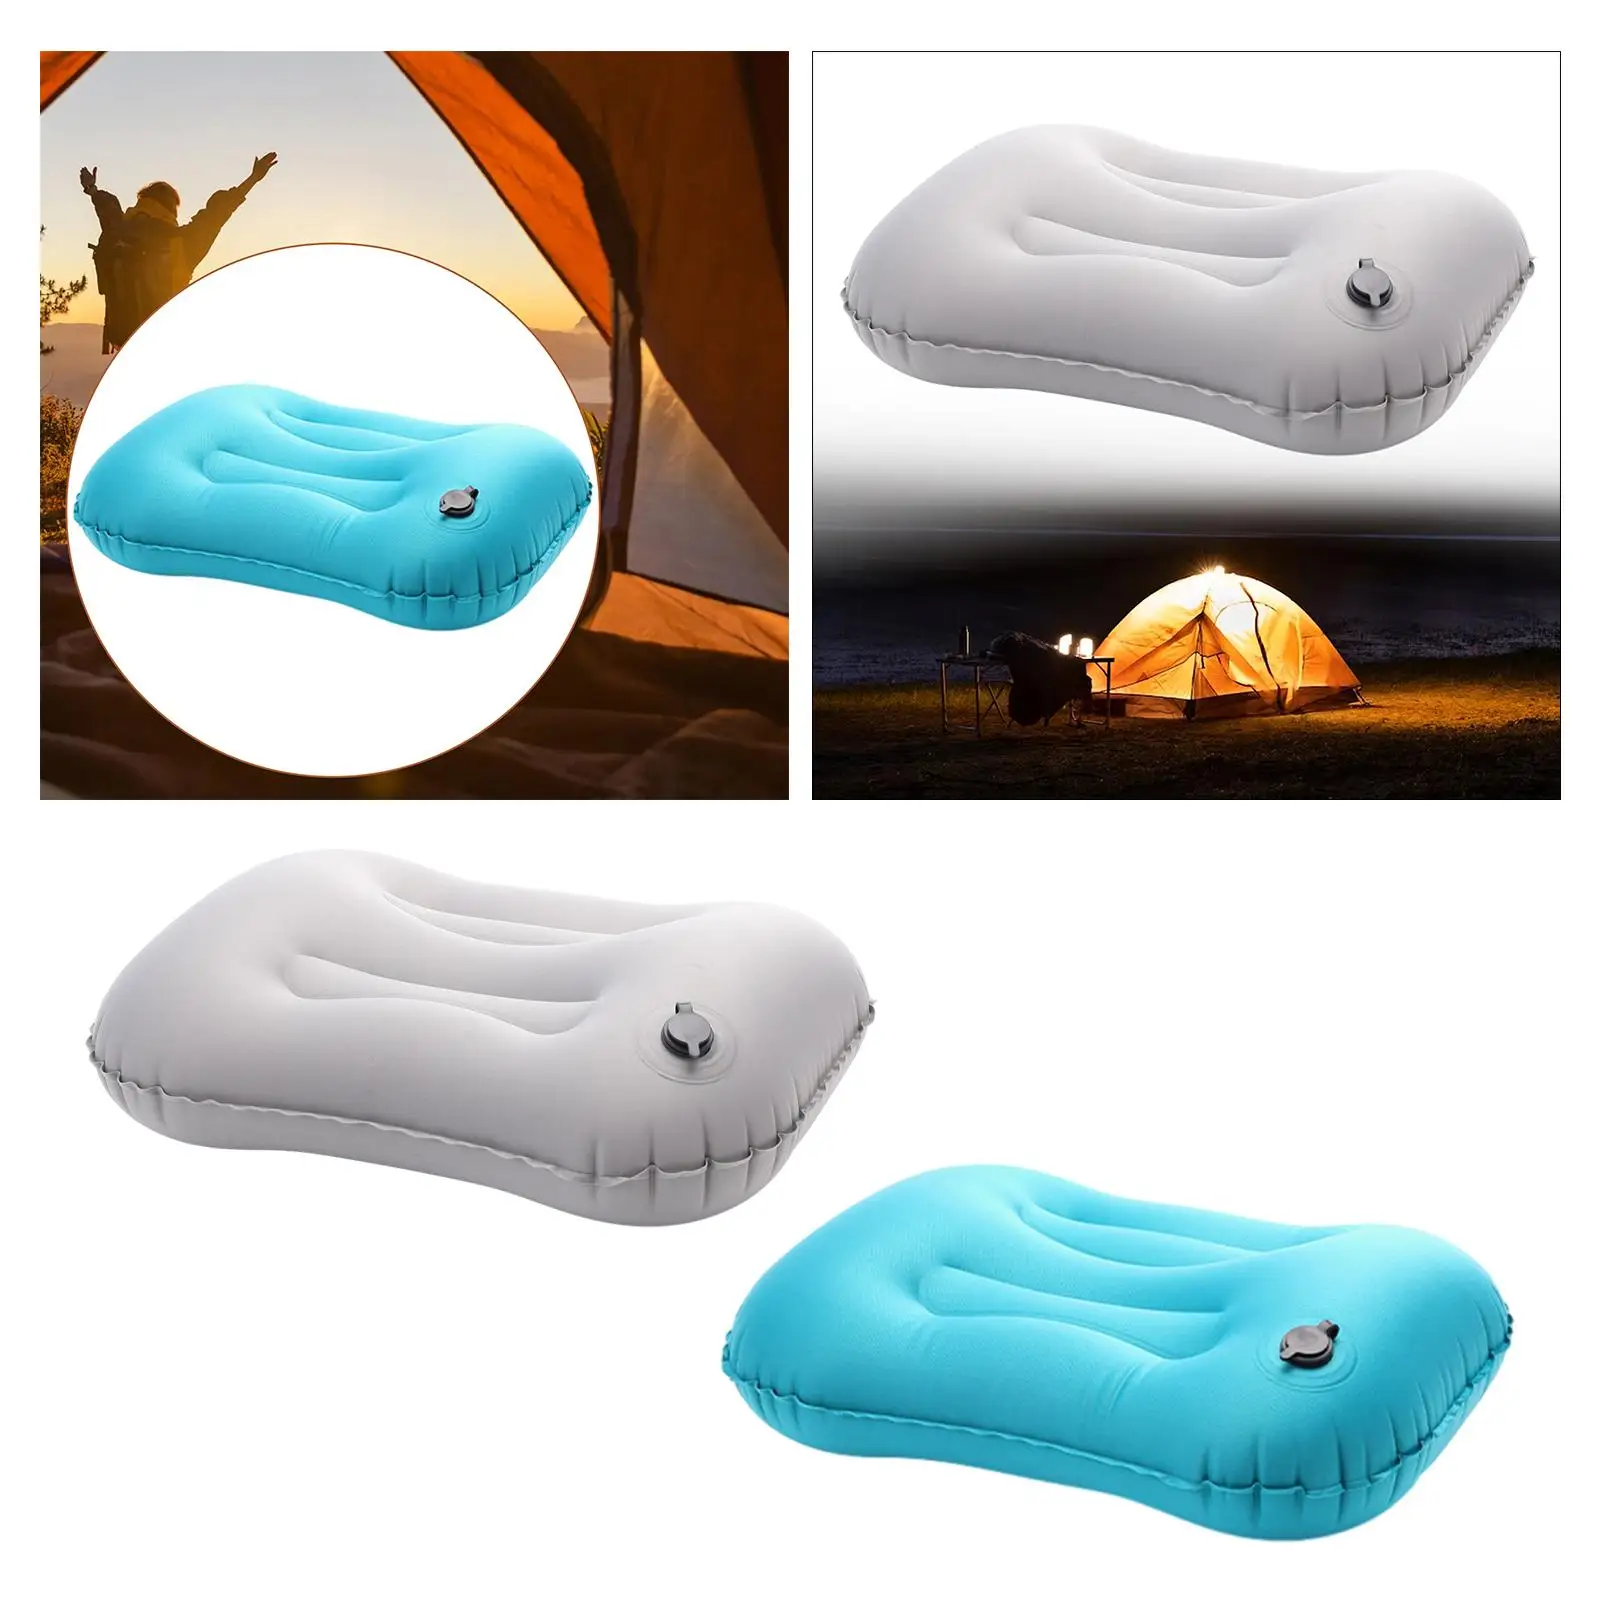 Camping Inflatable Pillow Sleeping Pillow Plane Air Pillow Blow up Air Pillow for Outdoor Hiking Backpacking Nap Rest Hammock